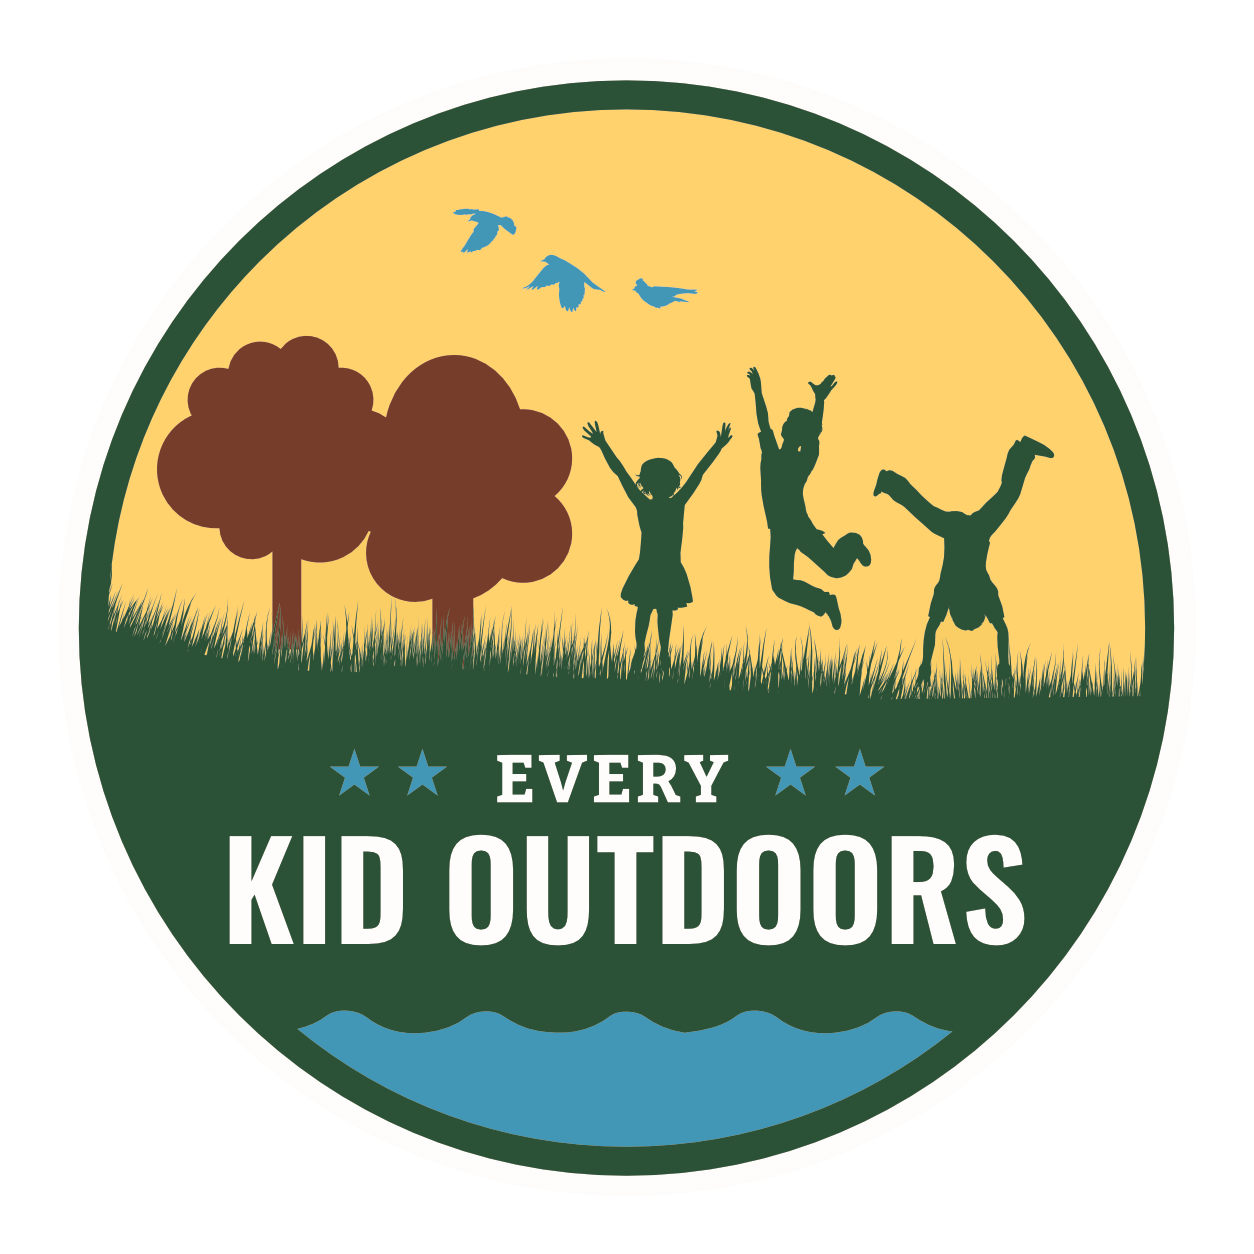 Every kid outdoors program logo for the 4th grade national park pass